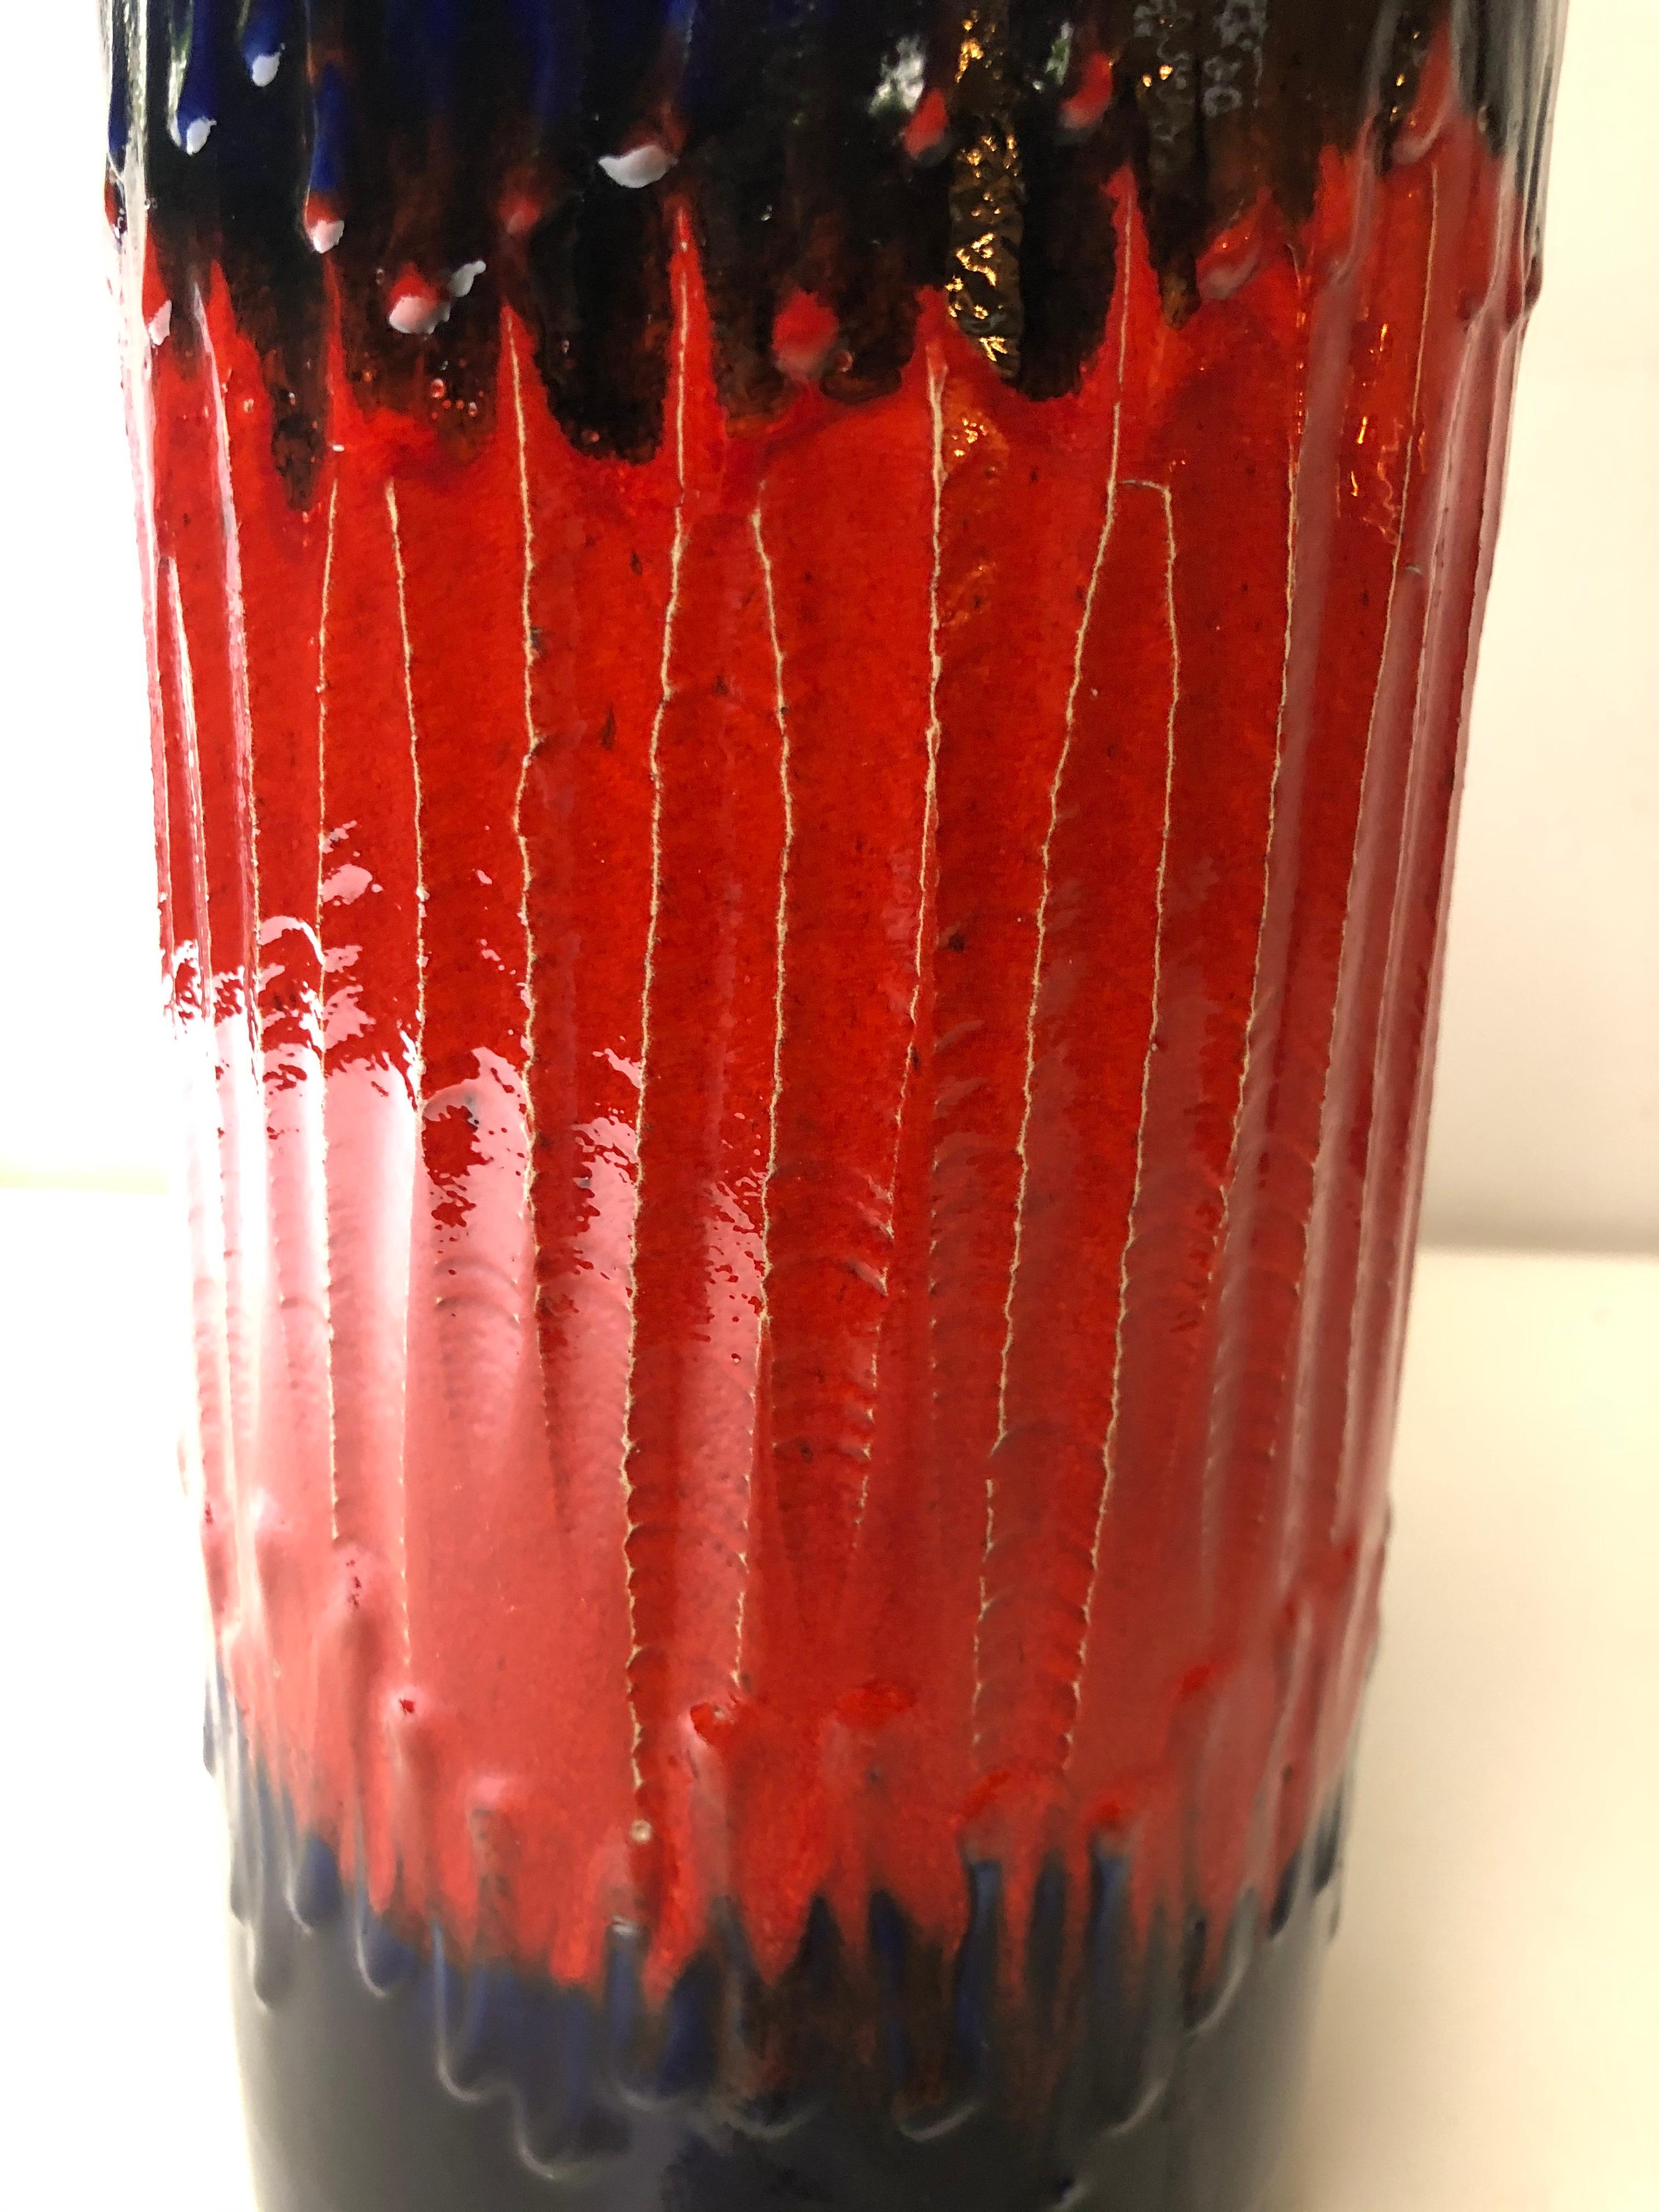 This original vintage vase was produced in the 1970s in Germany. It is made of porcelain in fat lava optic. The bottom is marked with 412-40. Straightforward and minimalistic design of the 1970s design era.